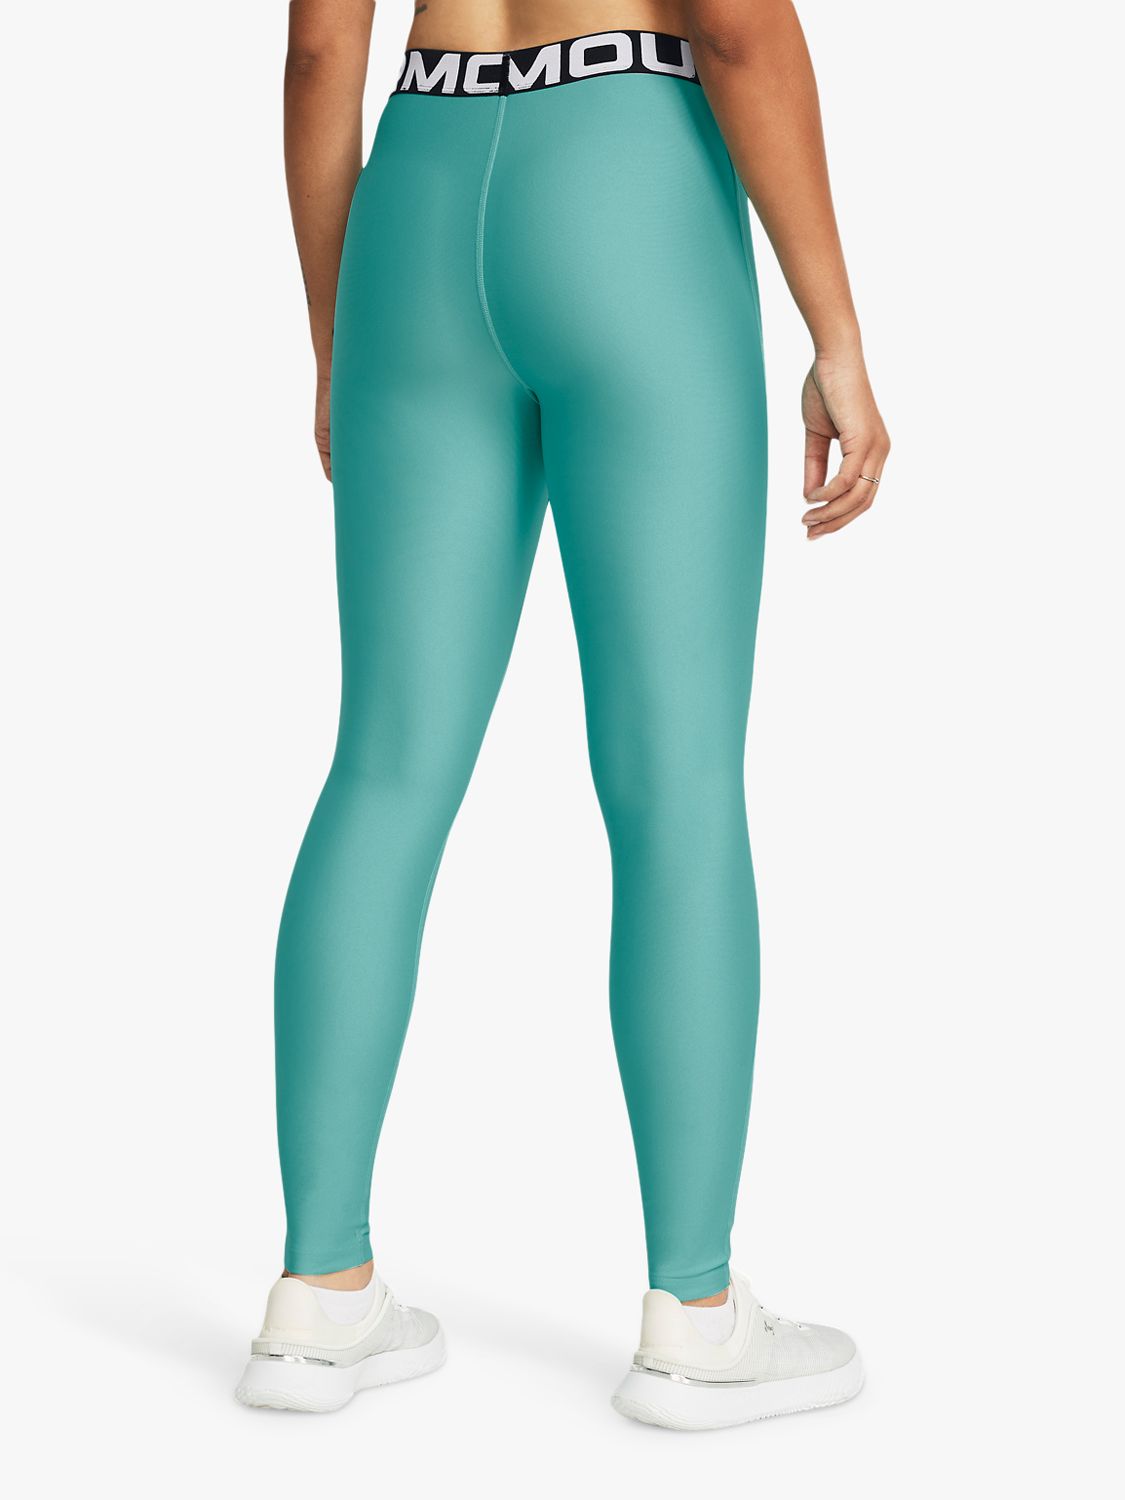 Under Armour Heat Gear Gym Leggings, Turquoise/White, XS